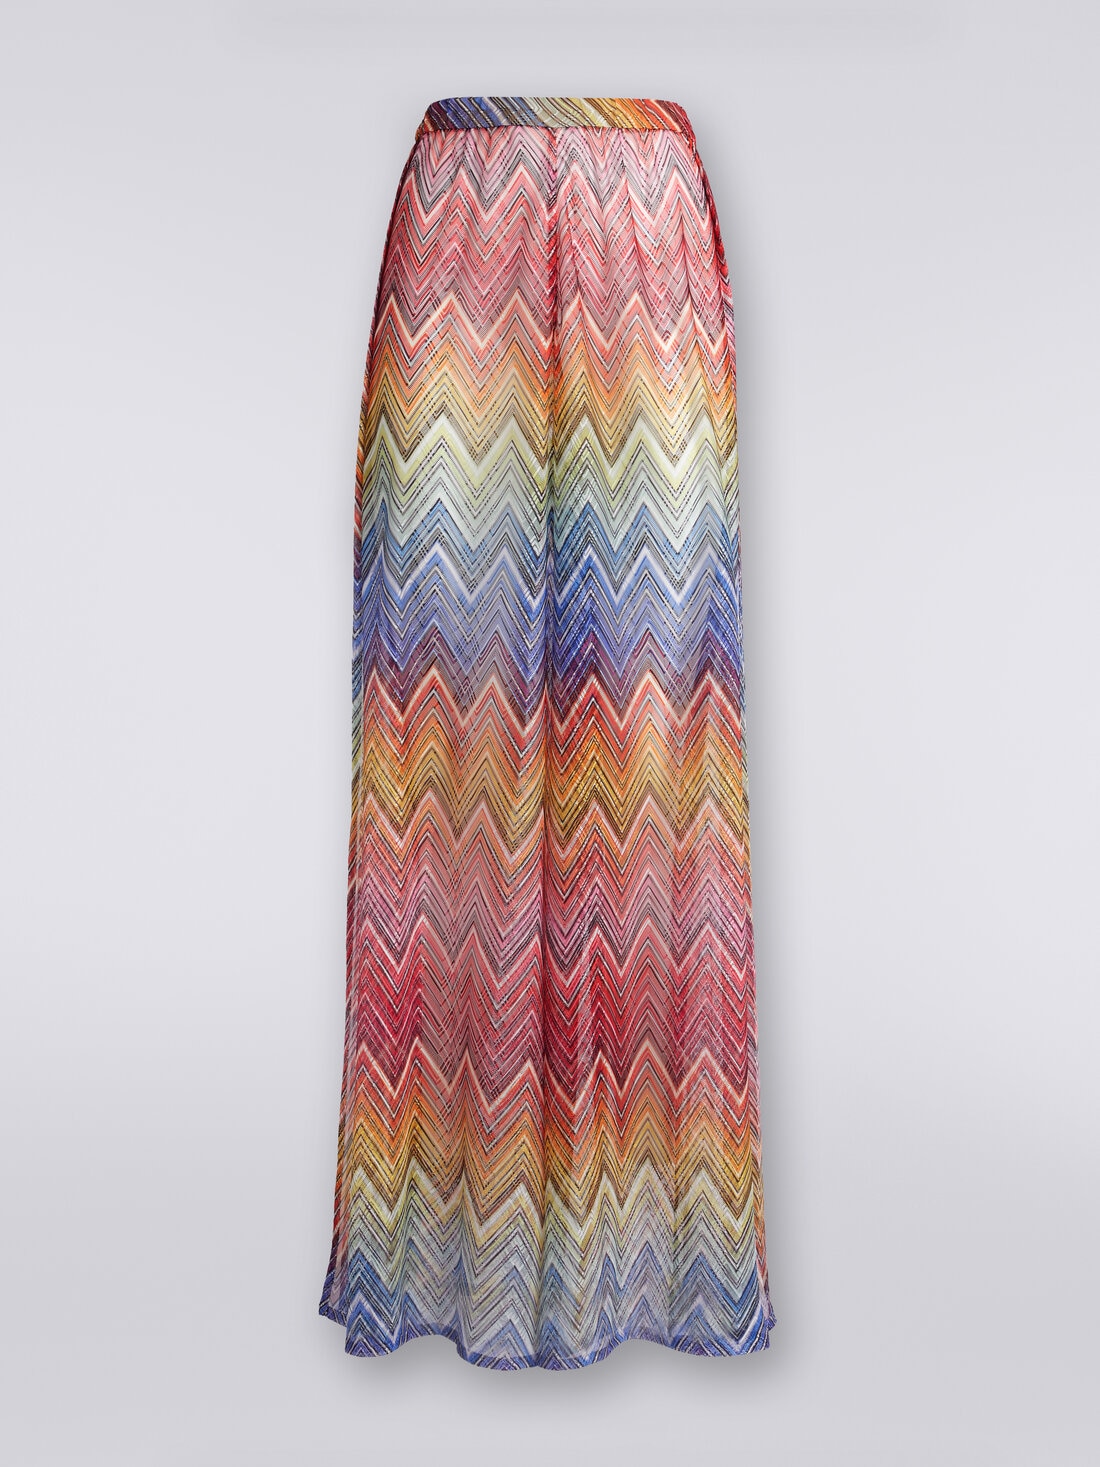 Cover up trousers in zigzag print fabric, Multicoloured  - MC23SI00BR00THS4157 - 0